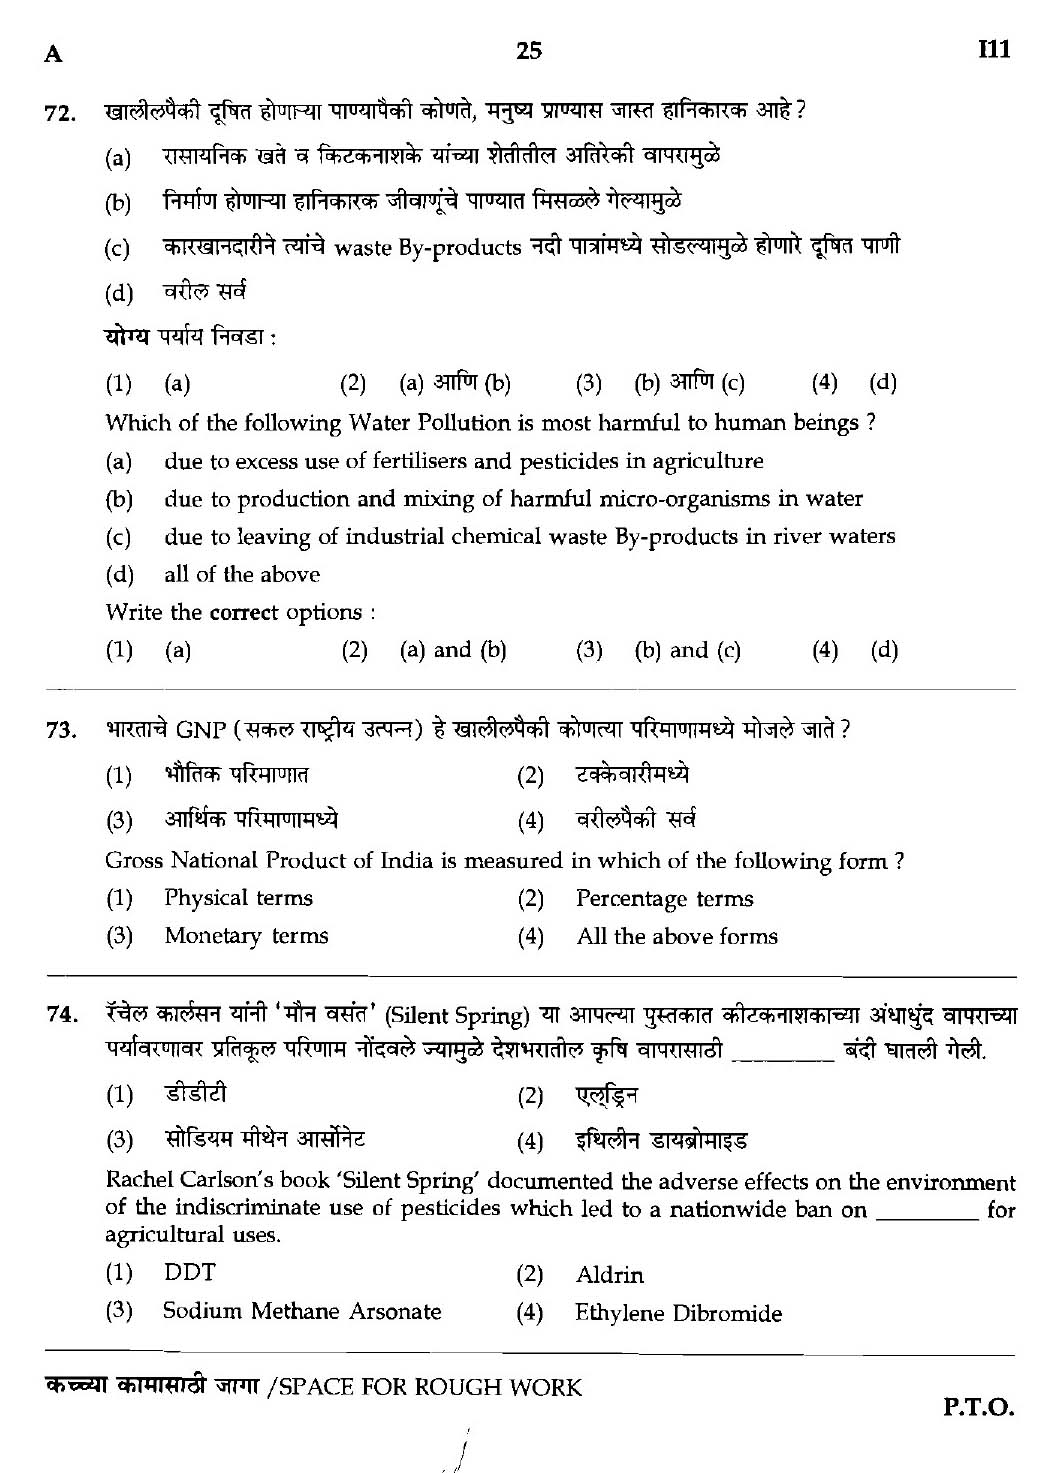 MPSC Agricultural Services Preliminary Exam 2018 Question Paper 24